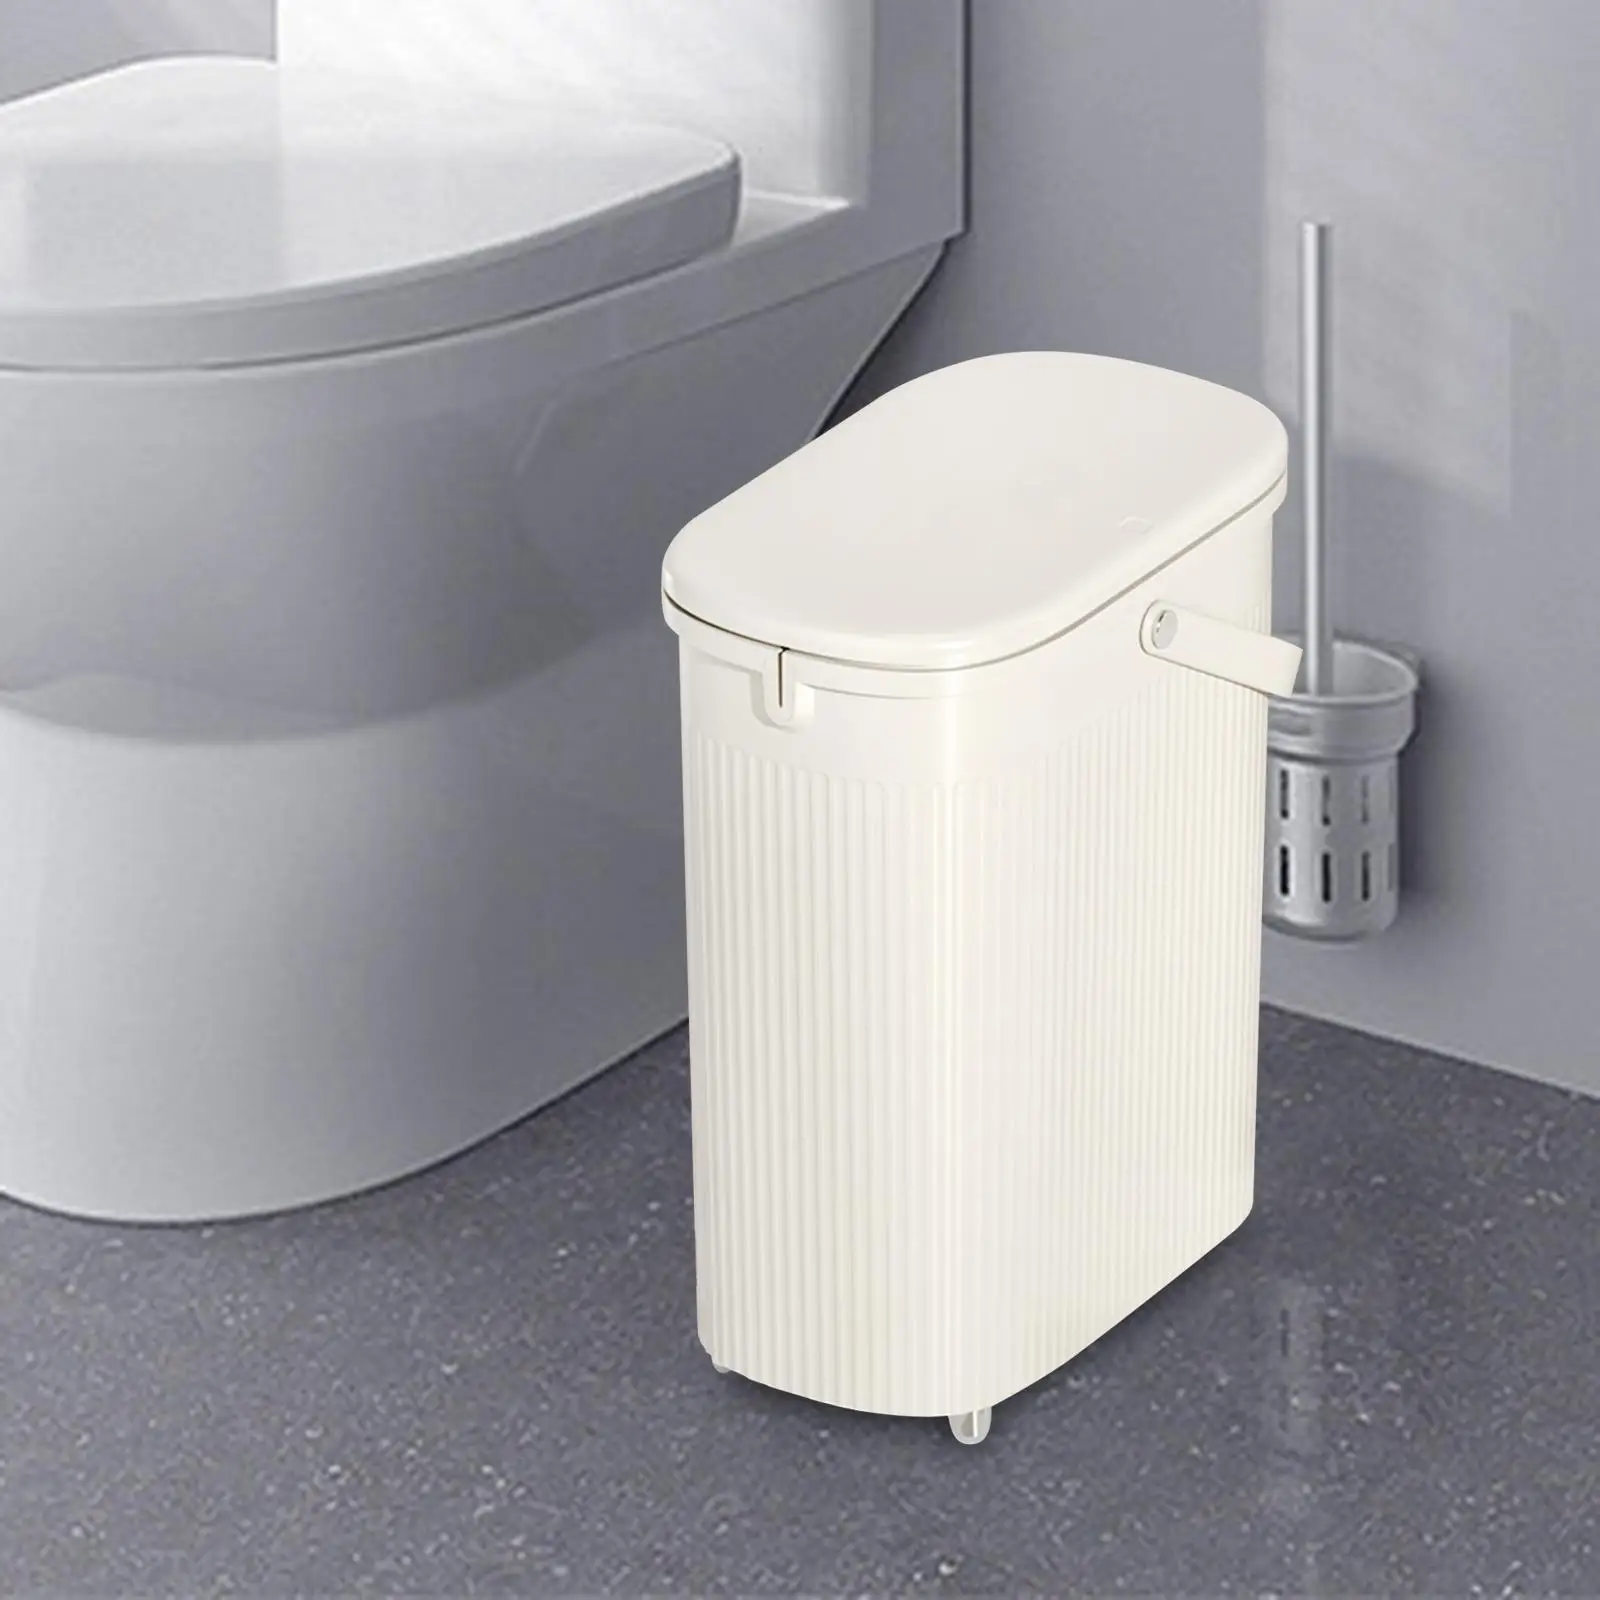 Wastebasket with Lid Stylish Design Rectangular Trash Can Narrow Garbage Can for Laundry Room Kitchen Entryway Study Office